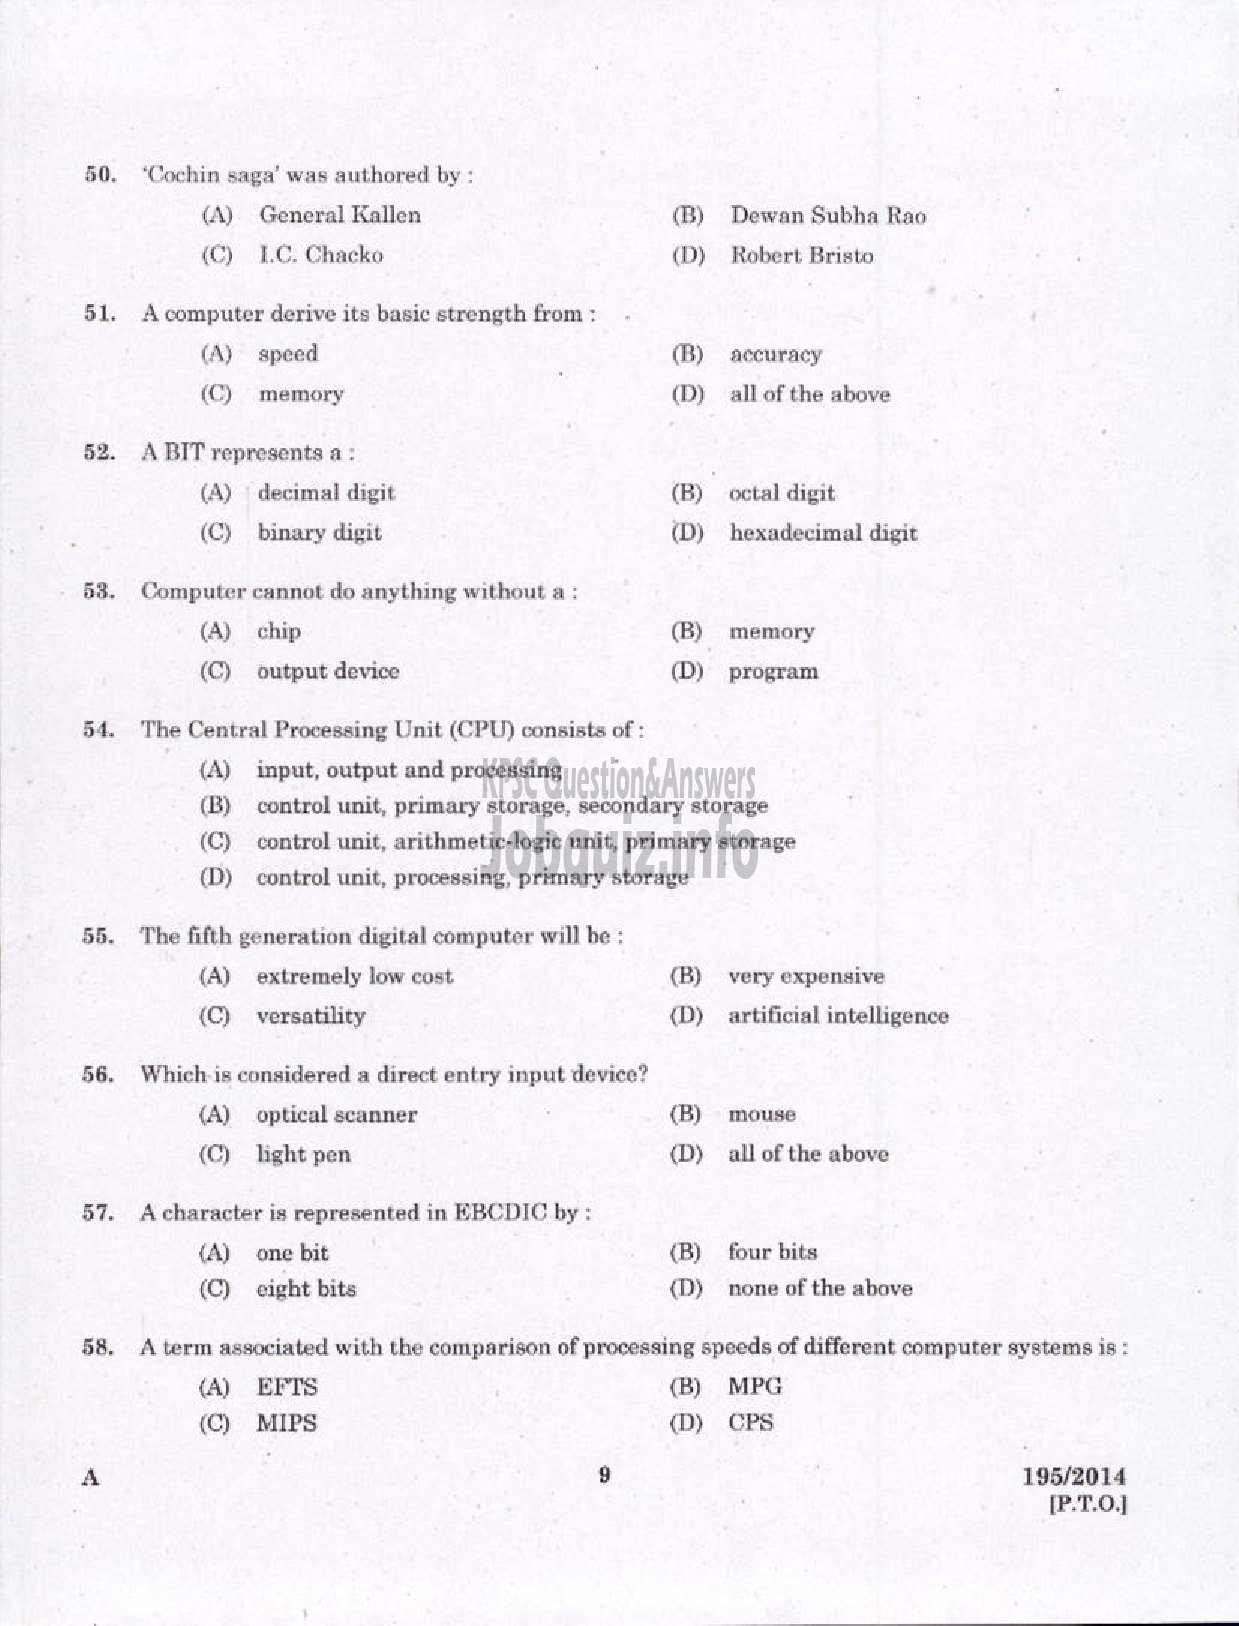 Kerala PSC Question Paper - COMPUTER PROGRAMMER CUM OPERATOR KERALA STATE BEVERAGES / MANUFACTURING AND MARKETING CORPORATION LTD-7